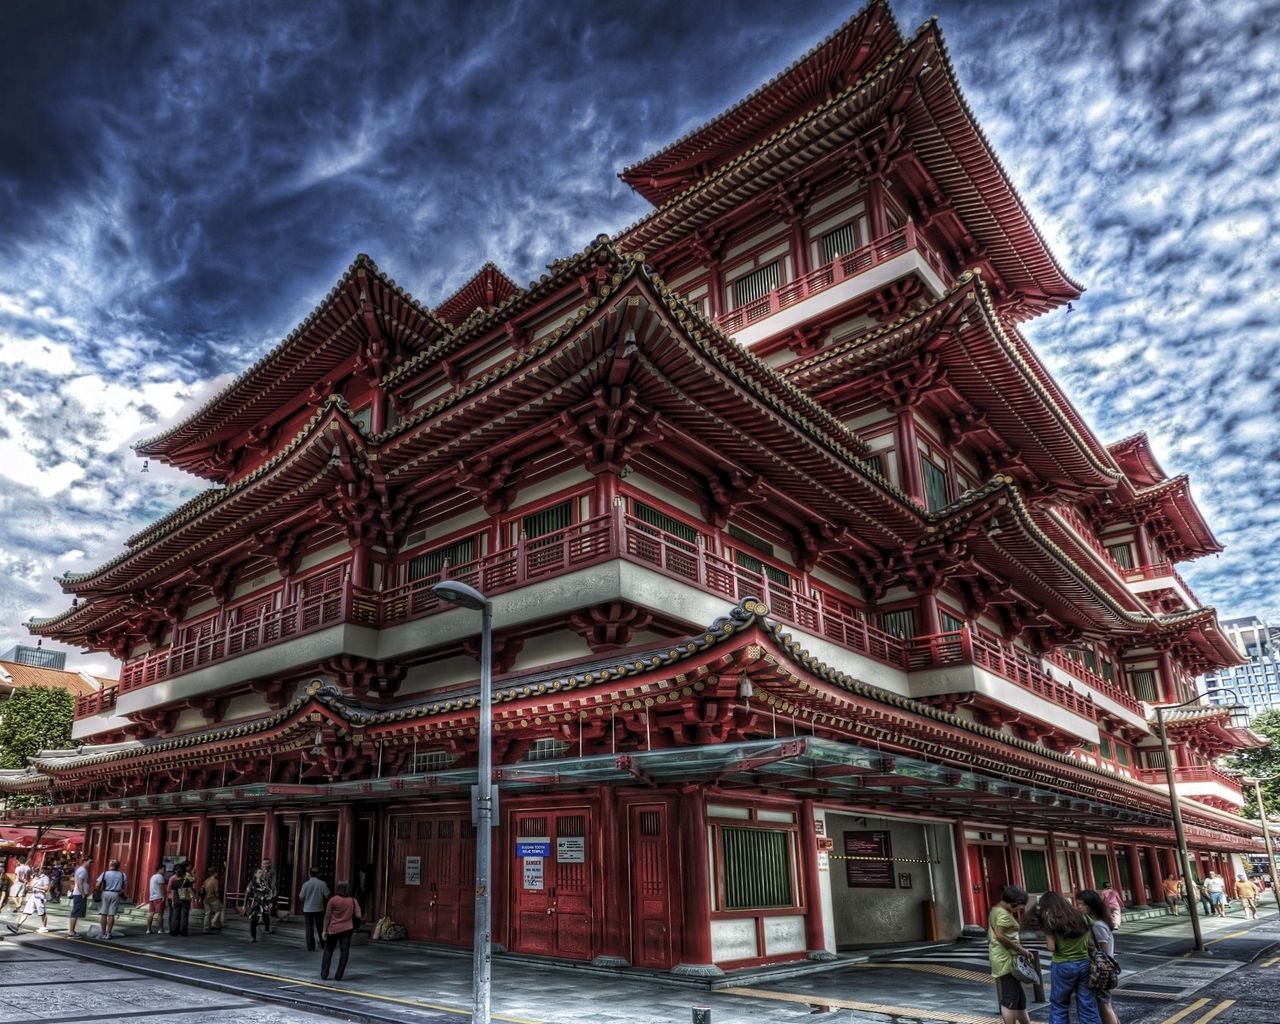 Download wallpaper 1280x1024 singapore, chinatown, buddha, tooth relic,  temple standard 5:4 hd background